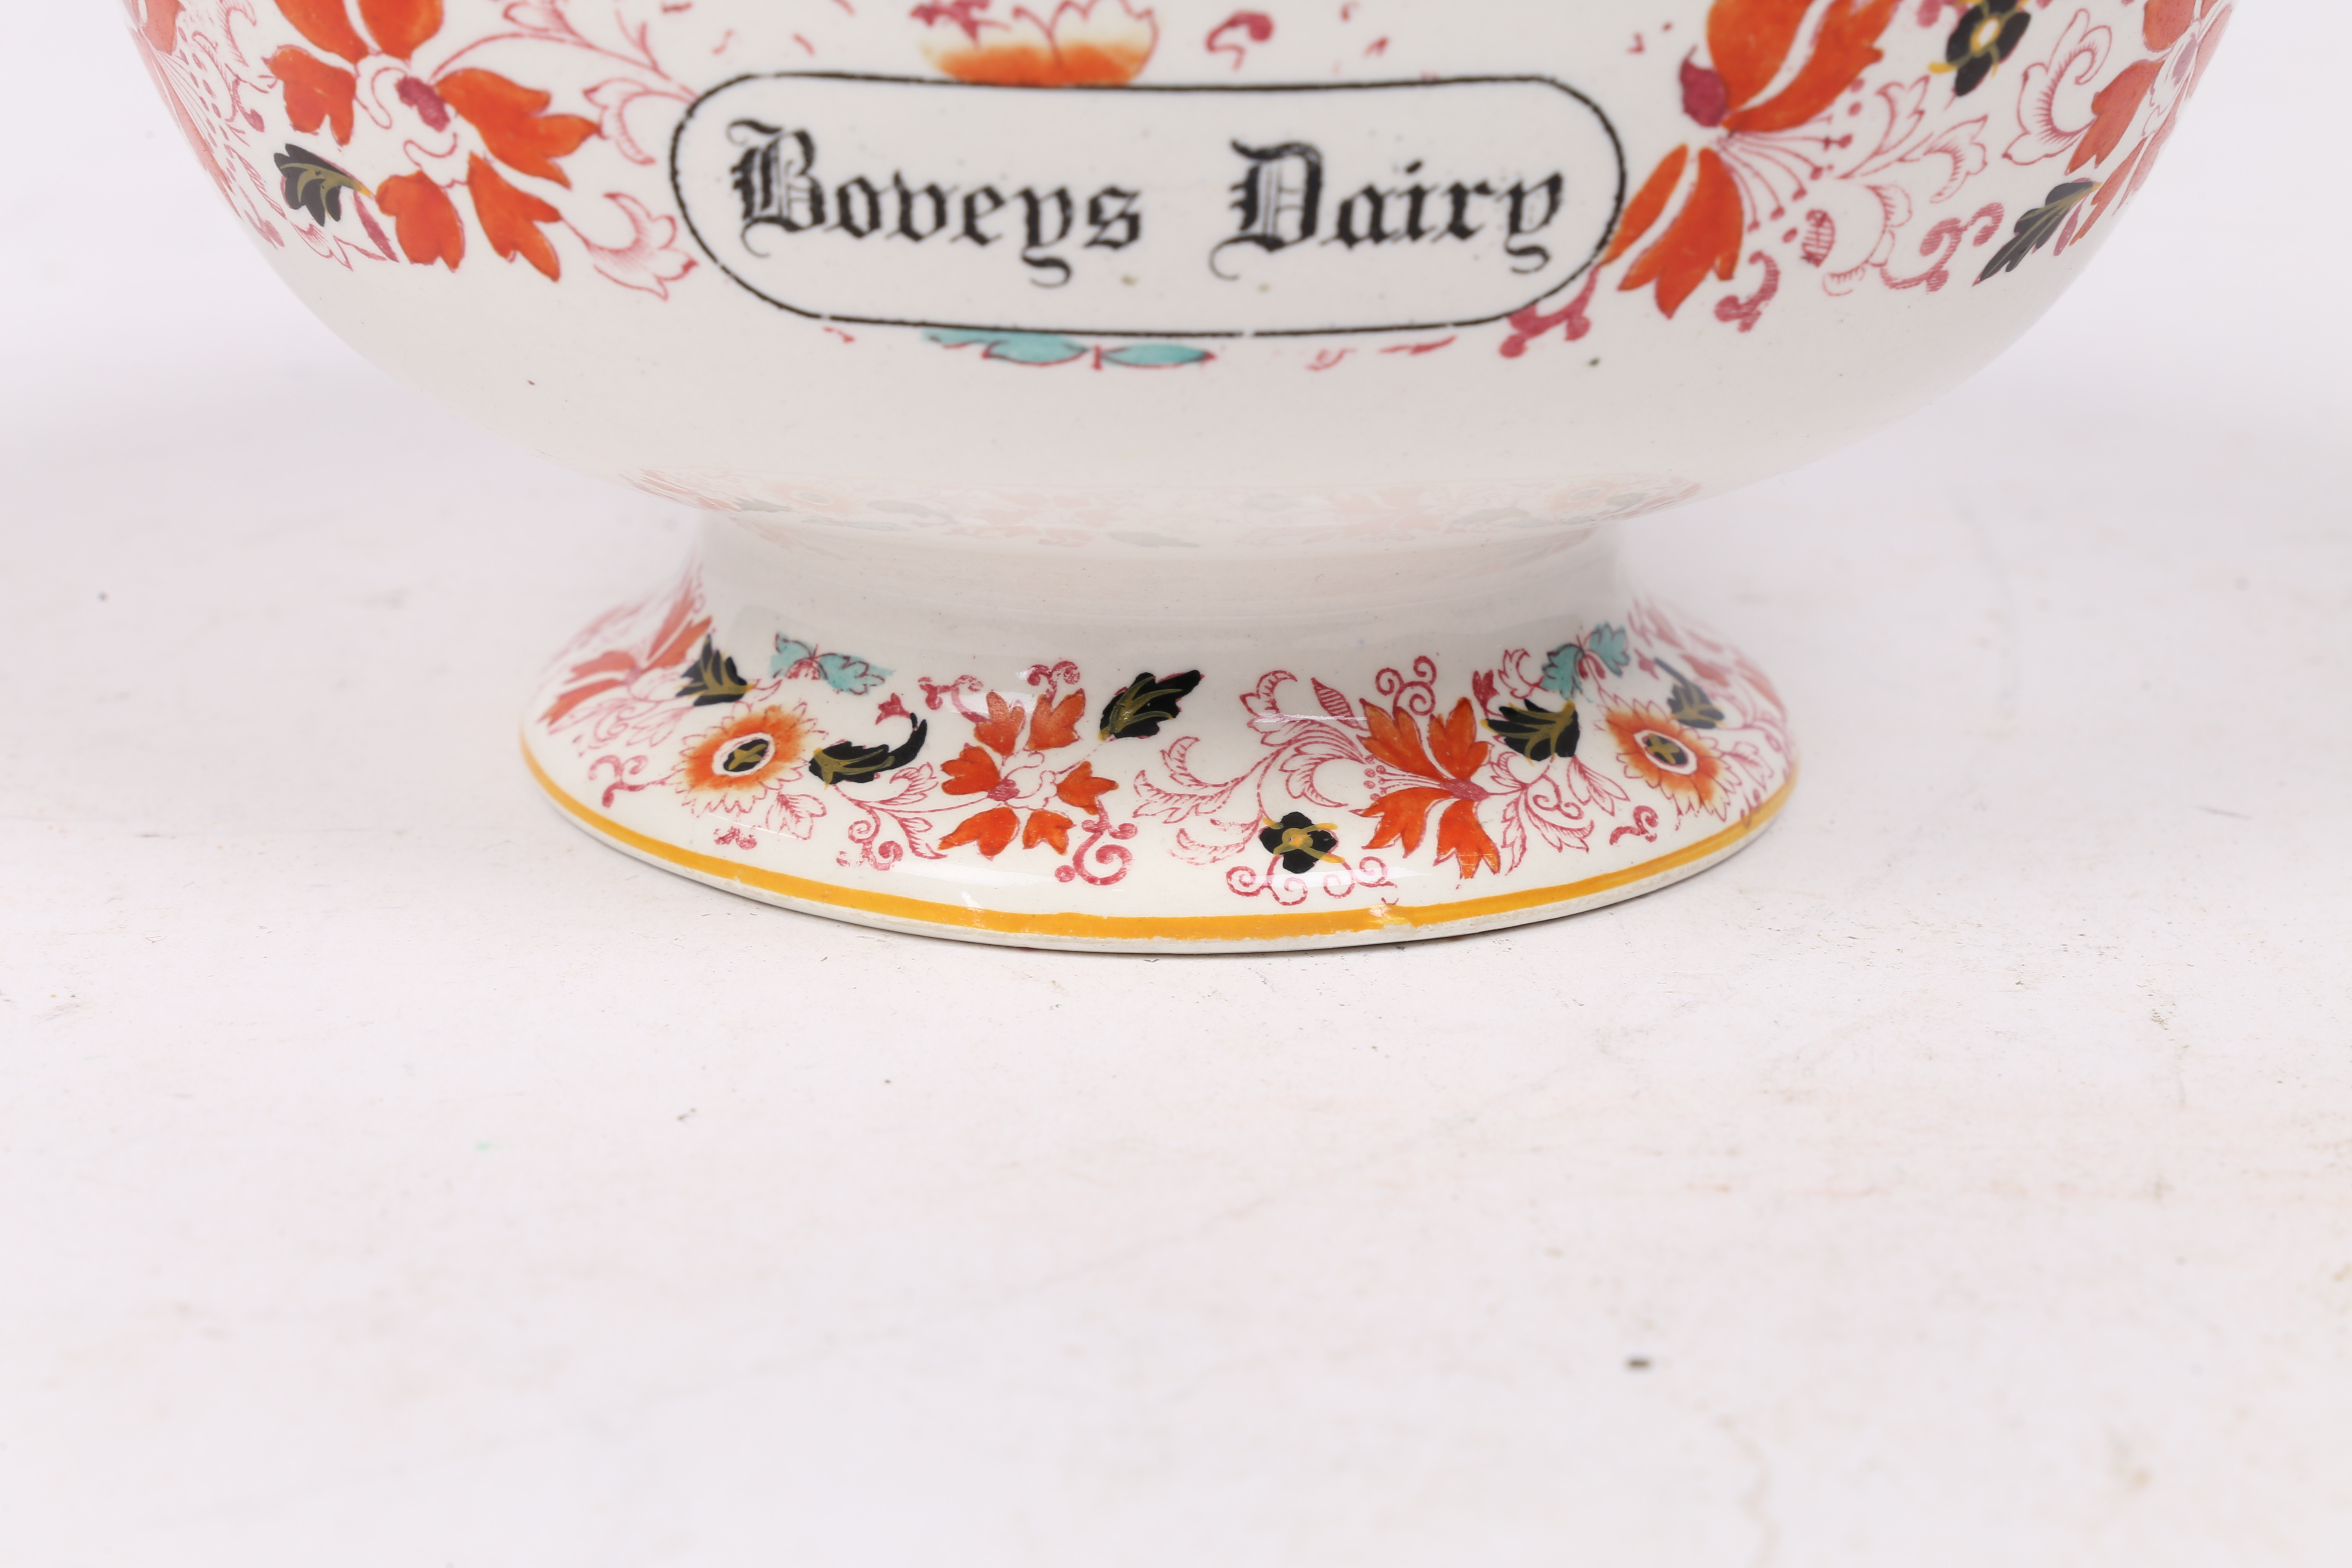 'BOVEYS DAIRY'. AN UNUSUAL LATE 19TH CENTURY PATTERNED DAIRY BOWL. - Image 4 of 7